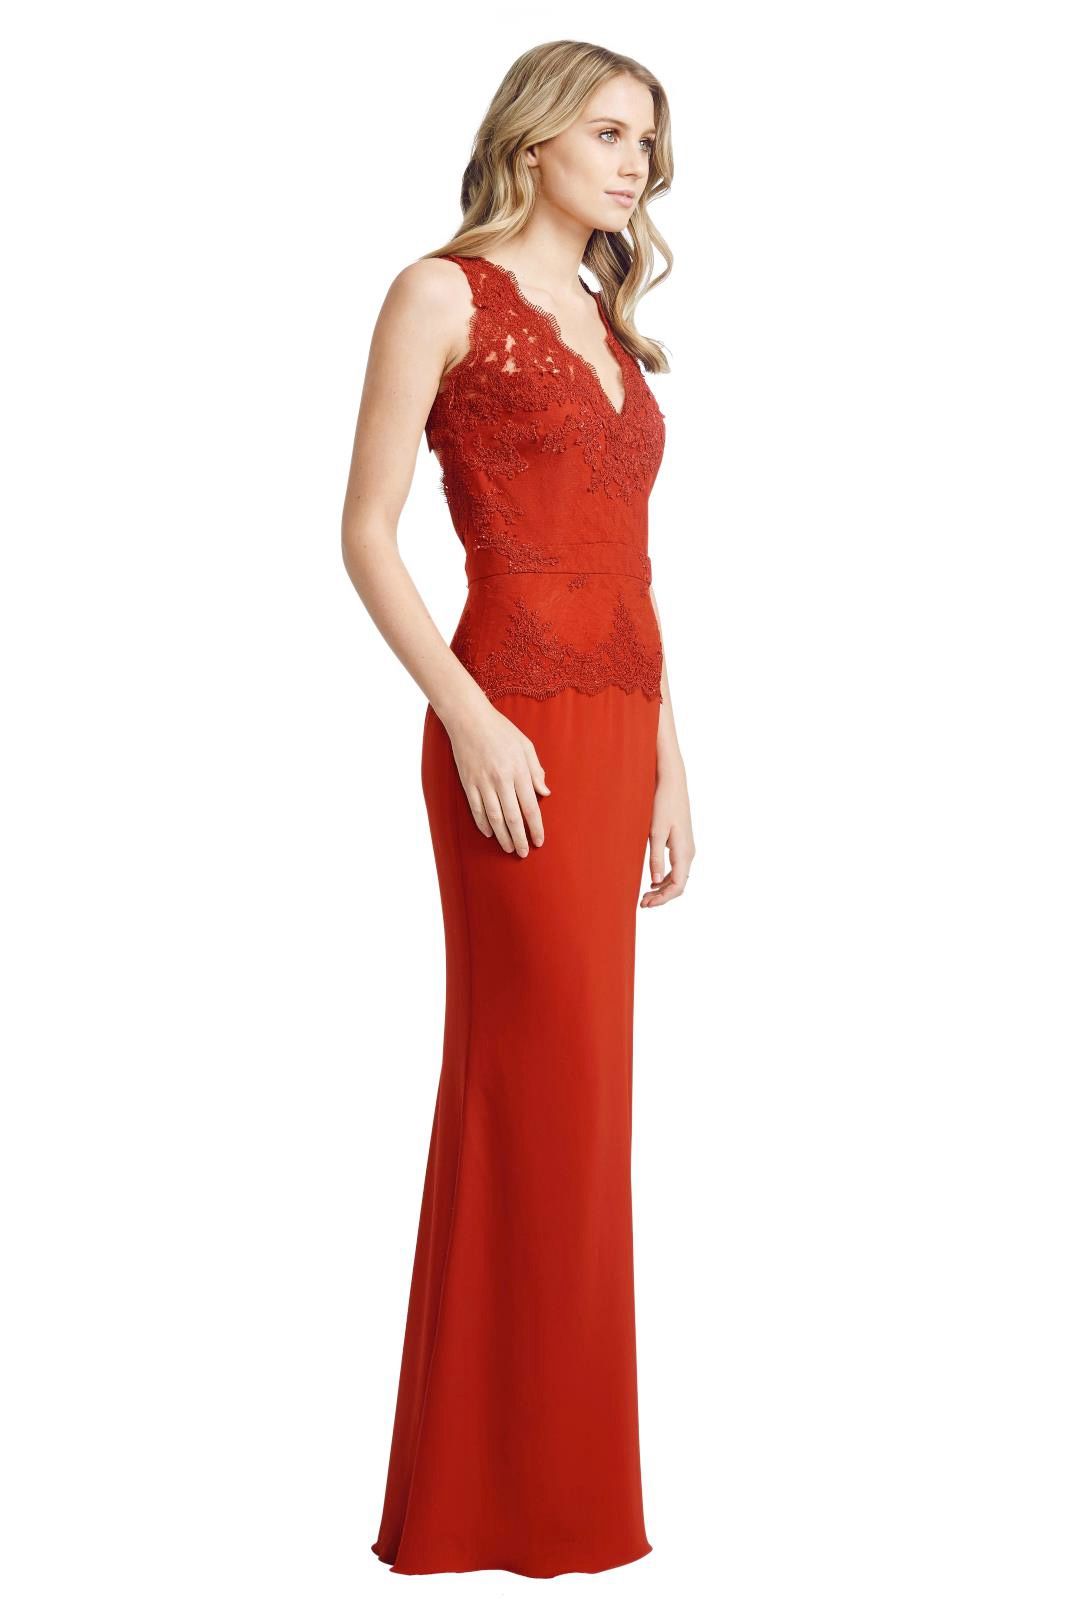 Badgley Mischka - Lace Open Gown - Red - Side